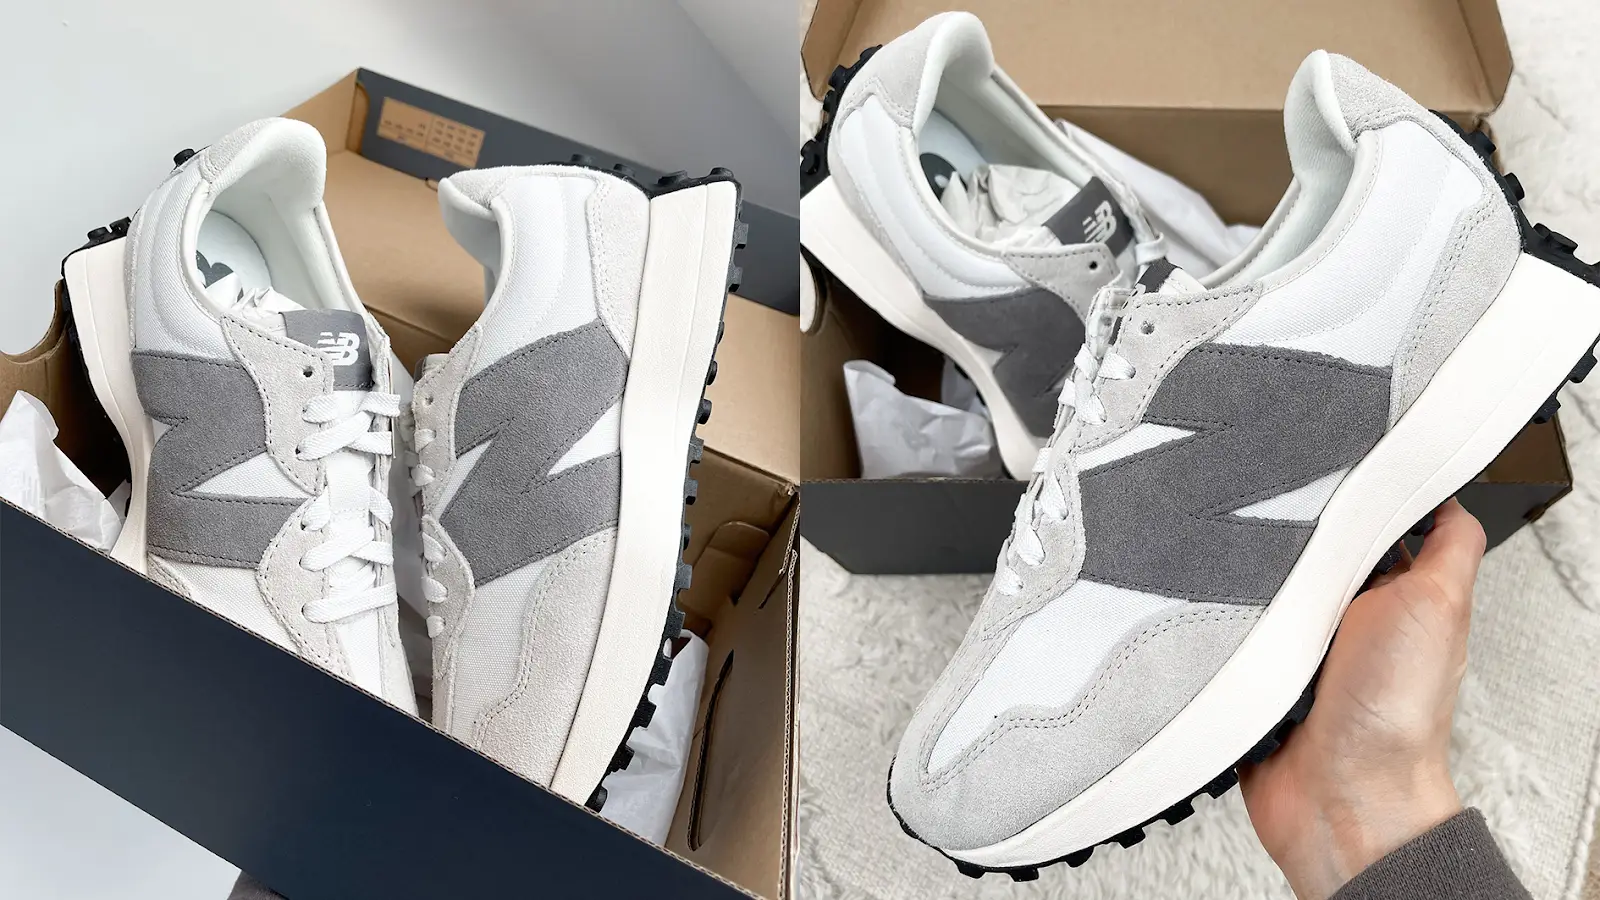 TSW Trending: The New Balance 327 is Our Favourite Sneaker This Week